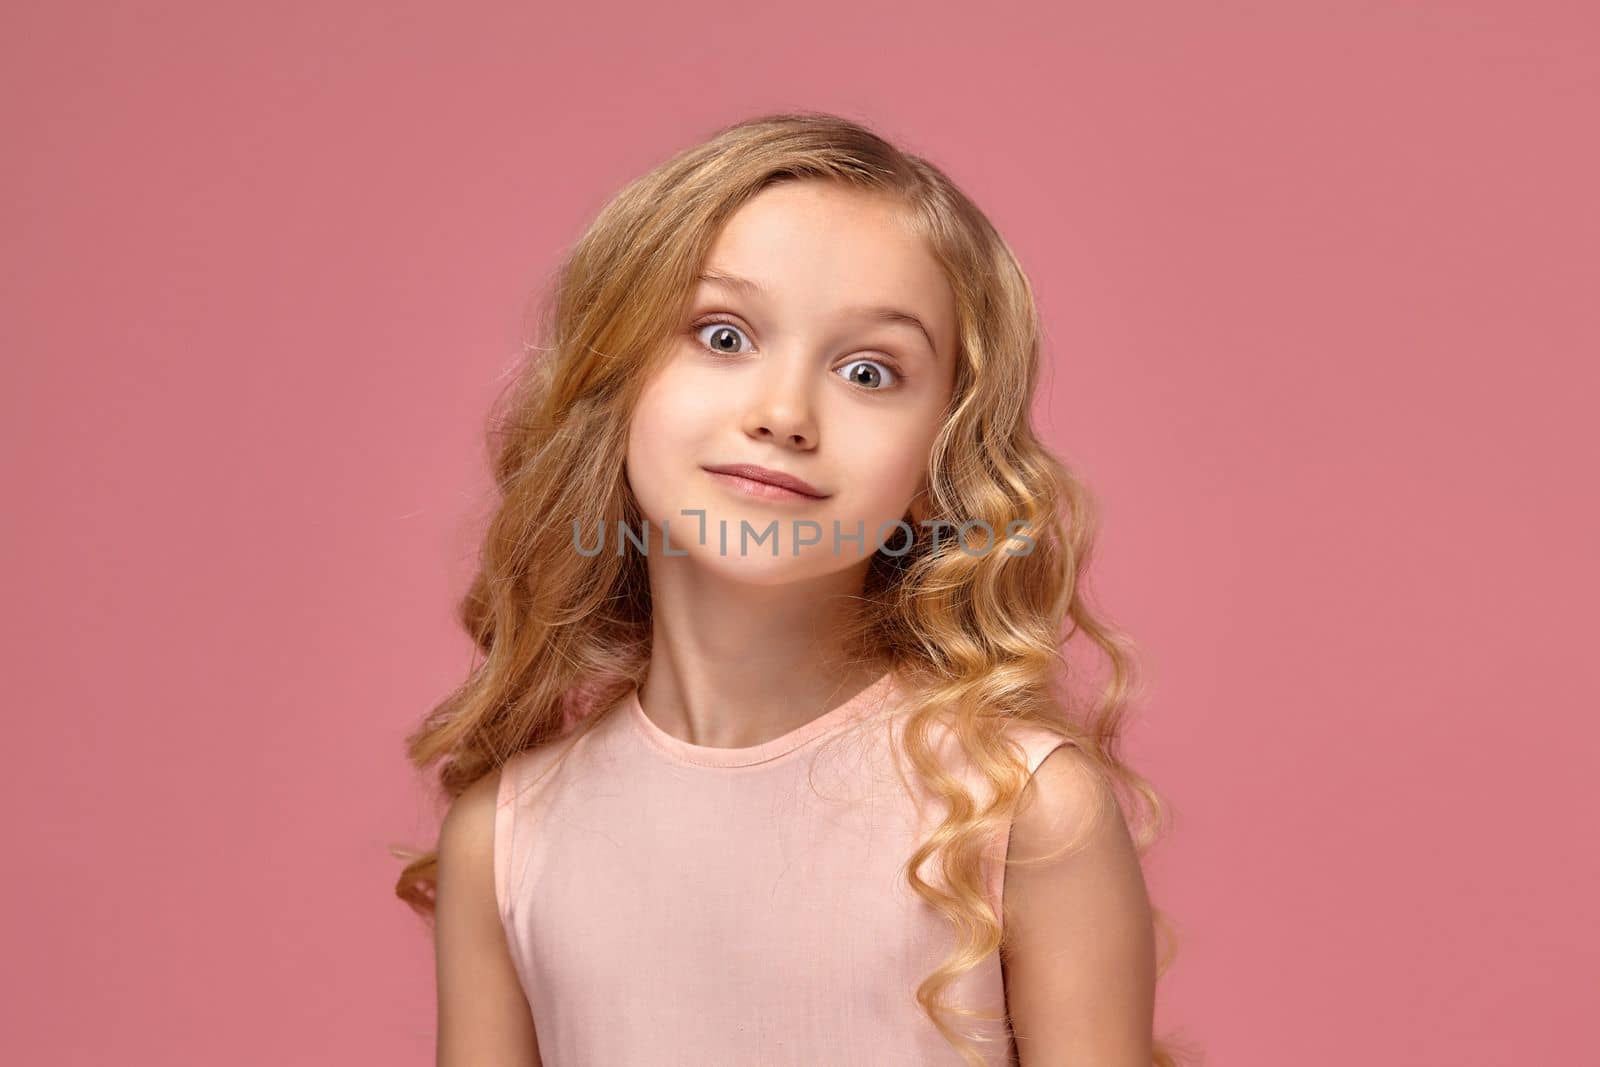 Beautiful little girl with a blond curly hair, in a pink dress poses for the camera and looks shoked, on a pink background